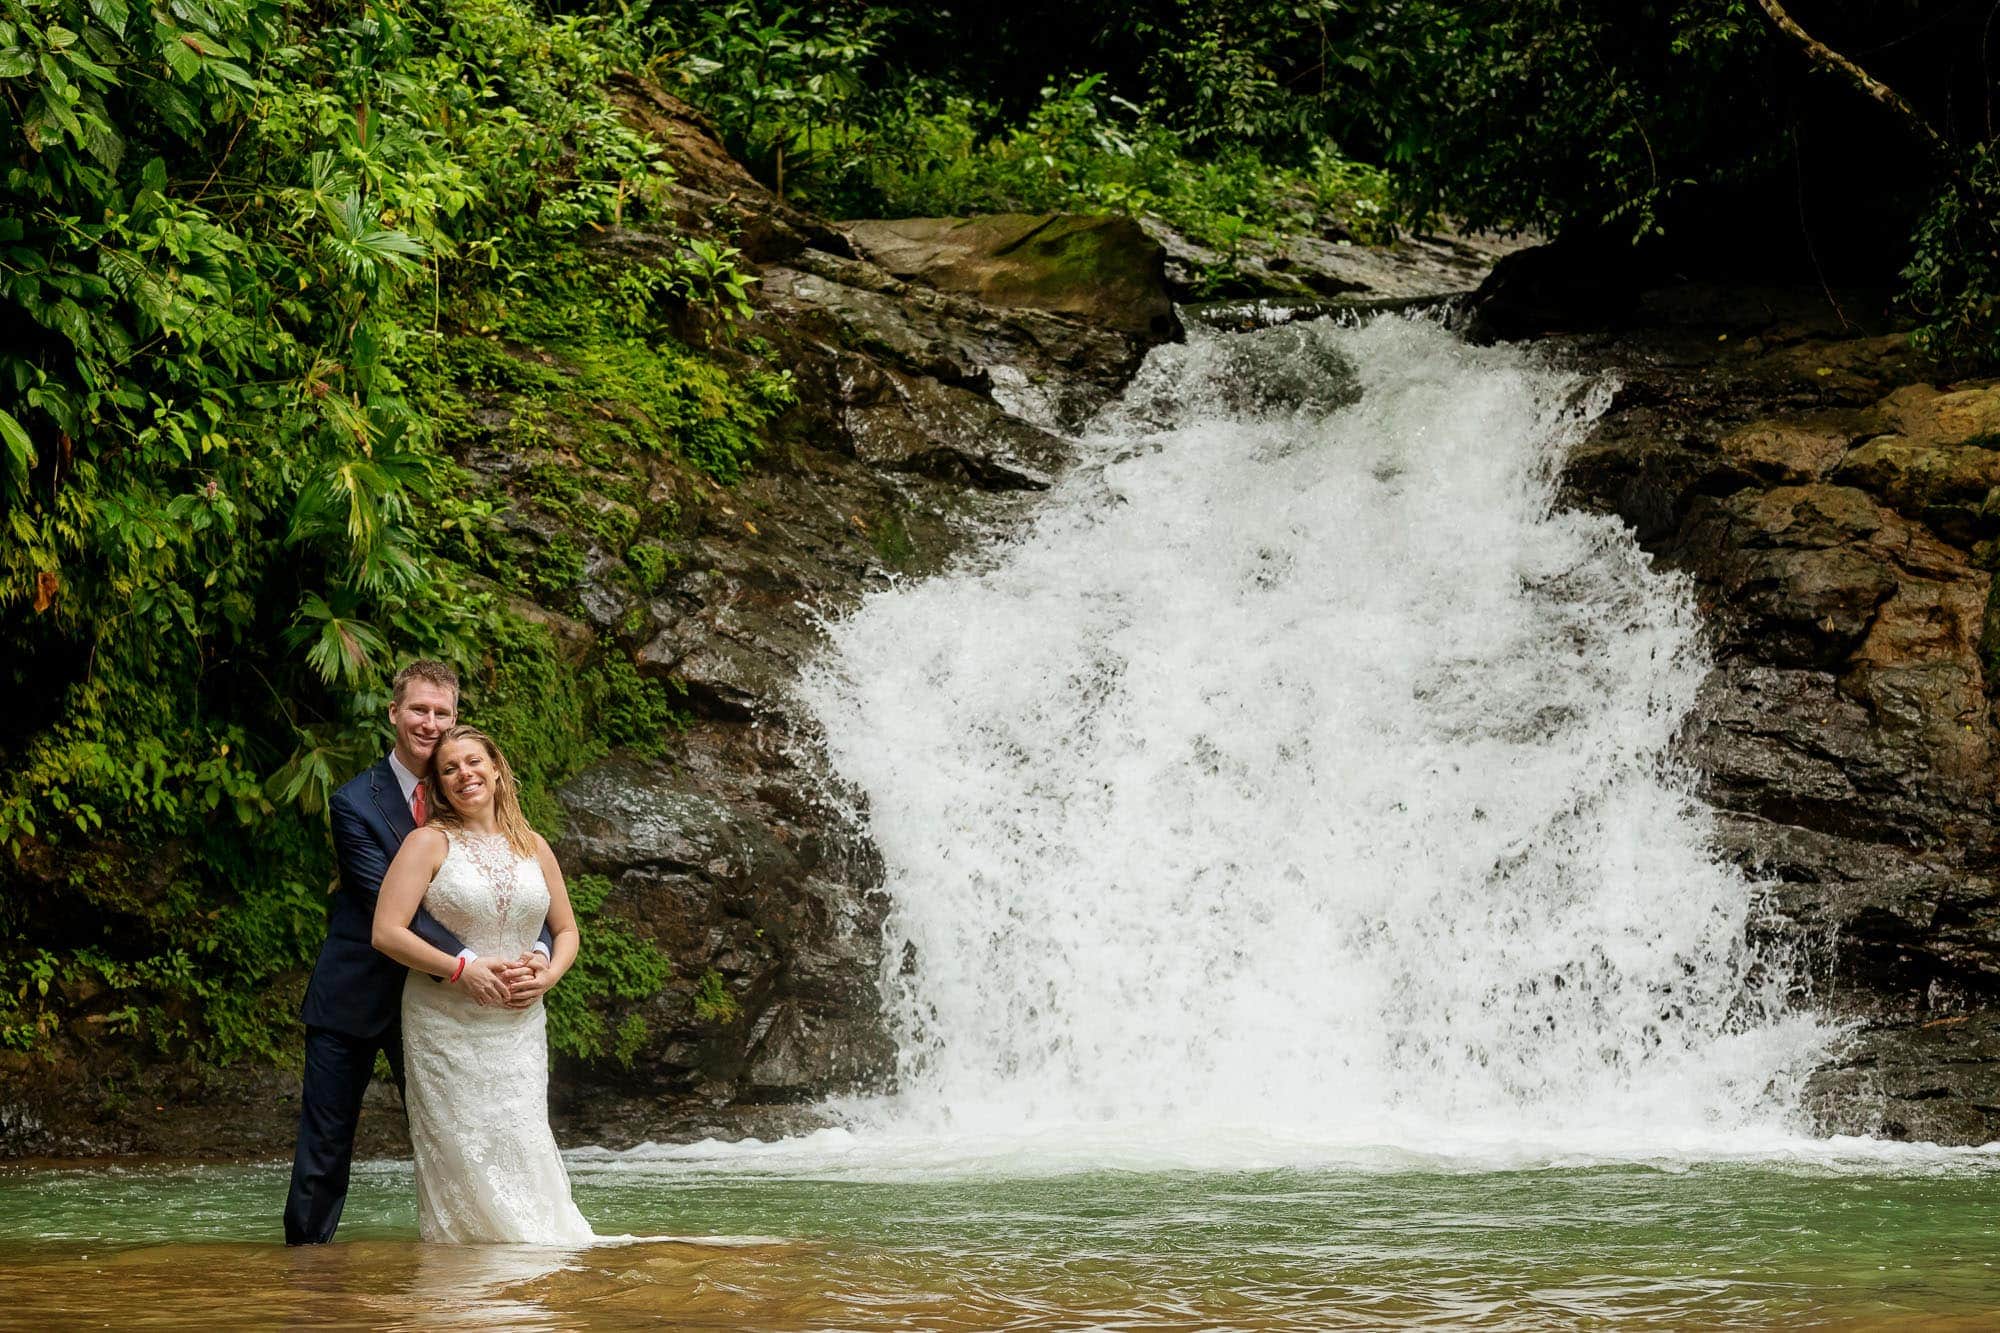 Bride and groom posing off the beaten path in Costa Rica at the base of a waterfall